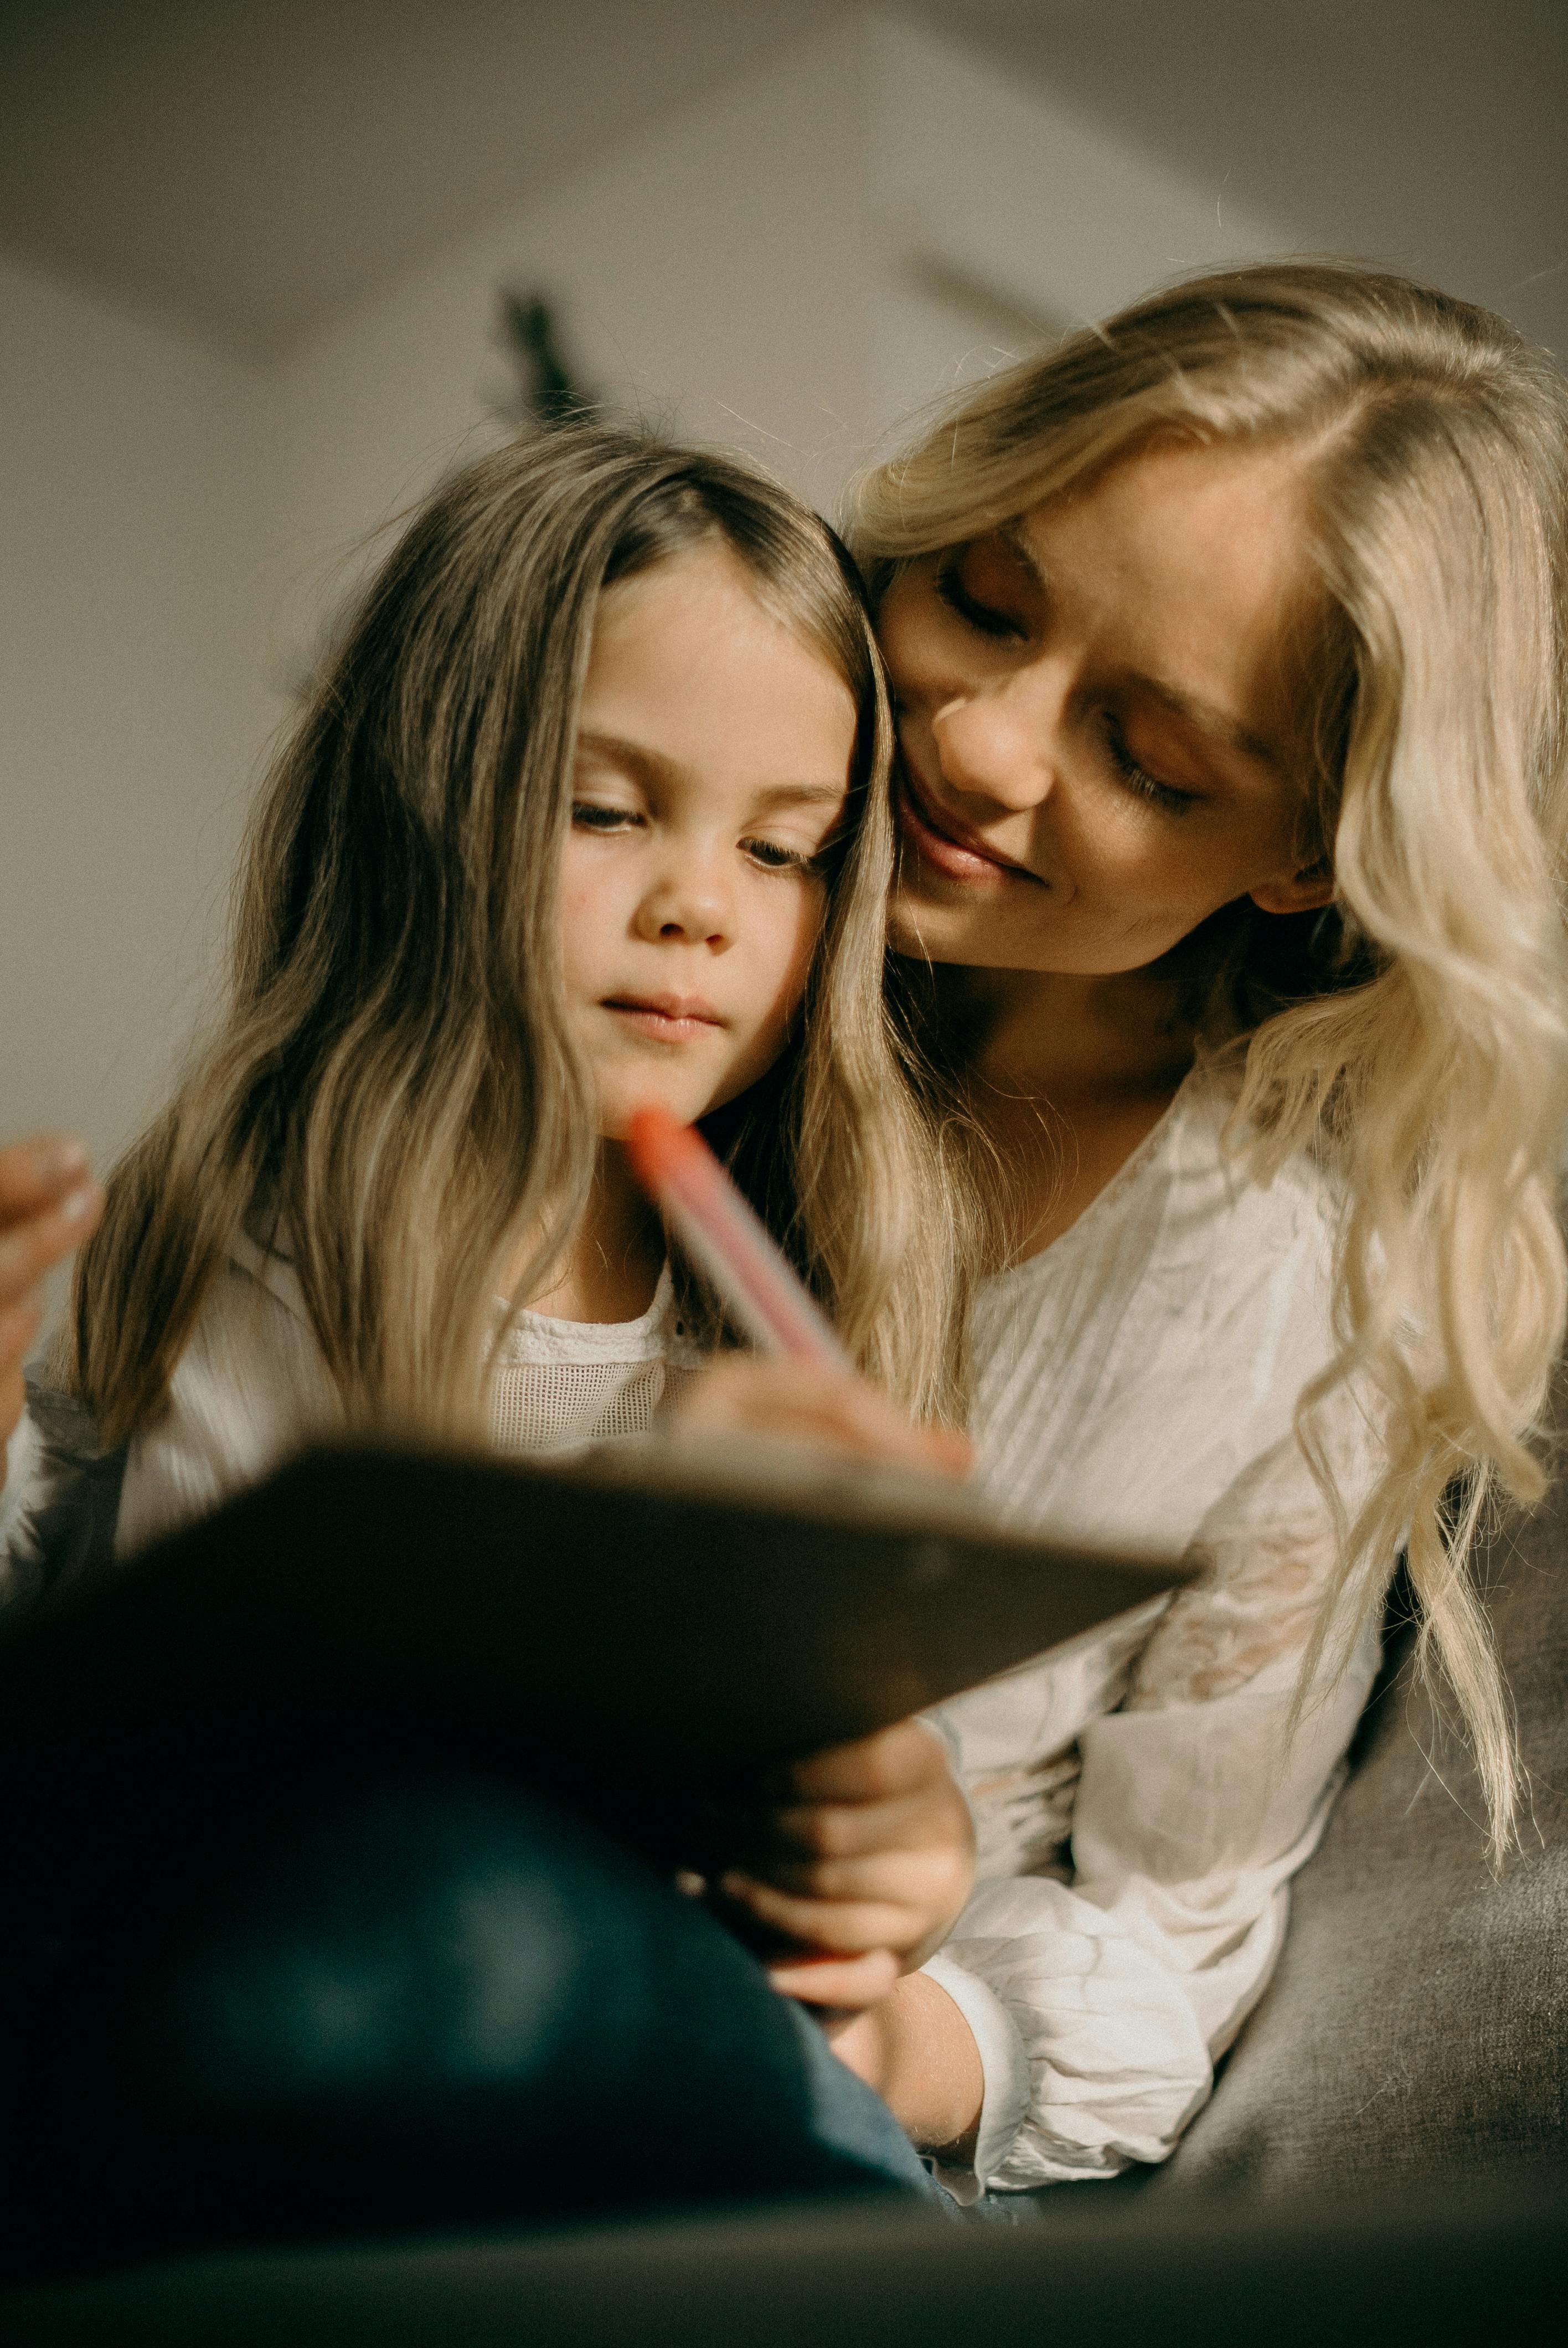 Child with therapist | Source: Pexels